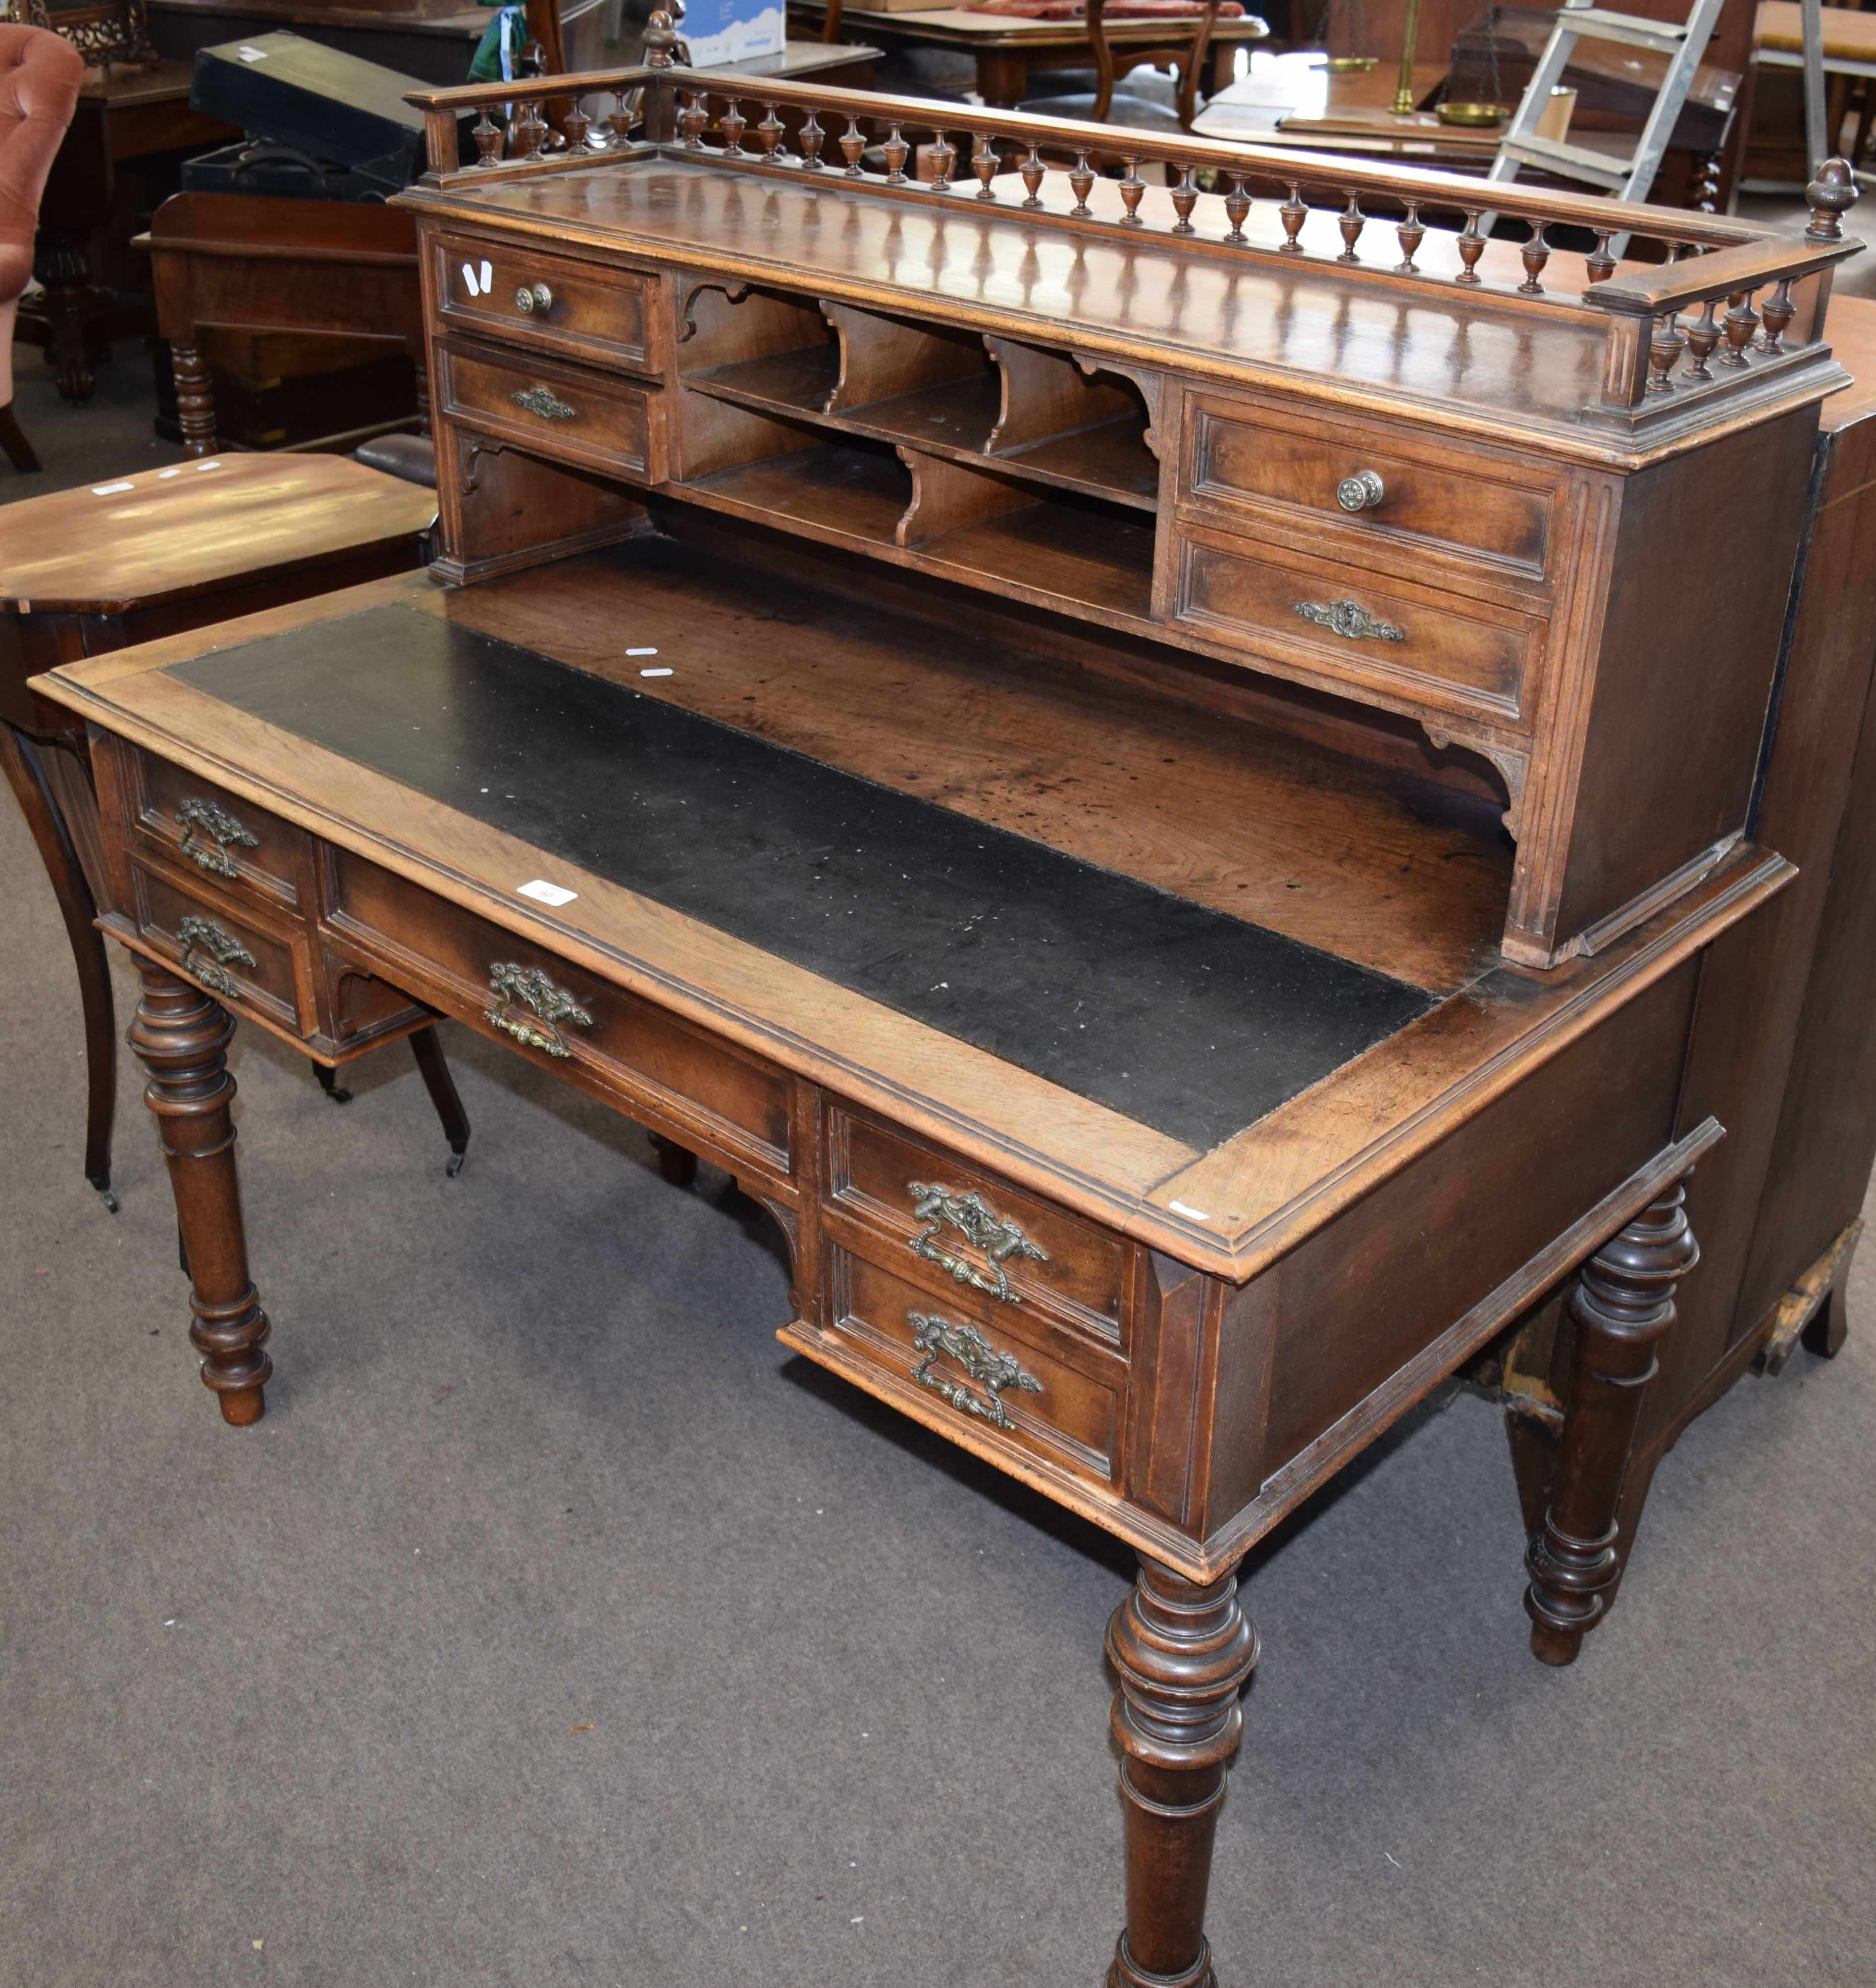 19th century mahogany desk with gallery top over pigeon holes and drawers and sliding writing